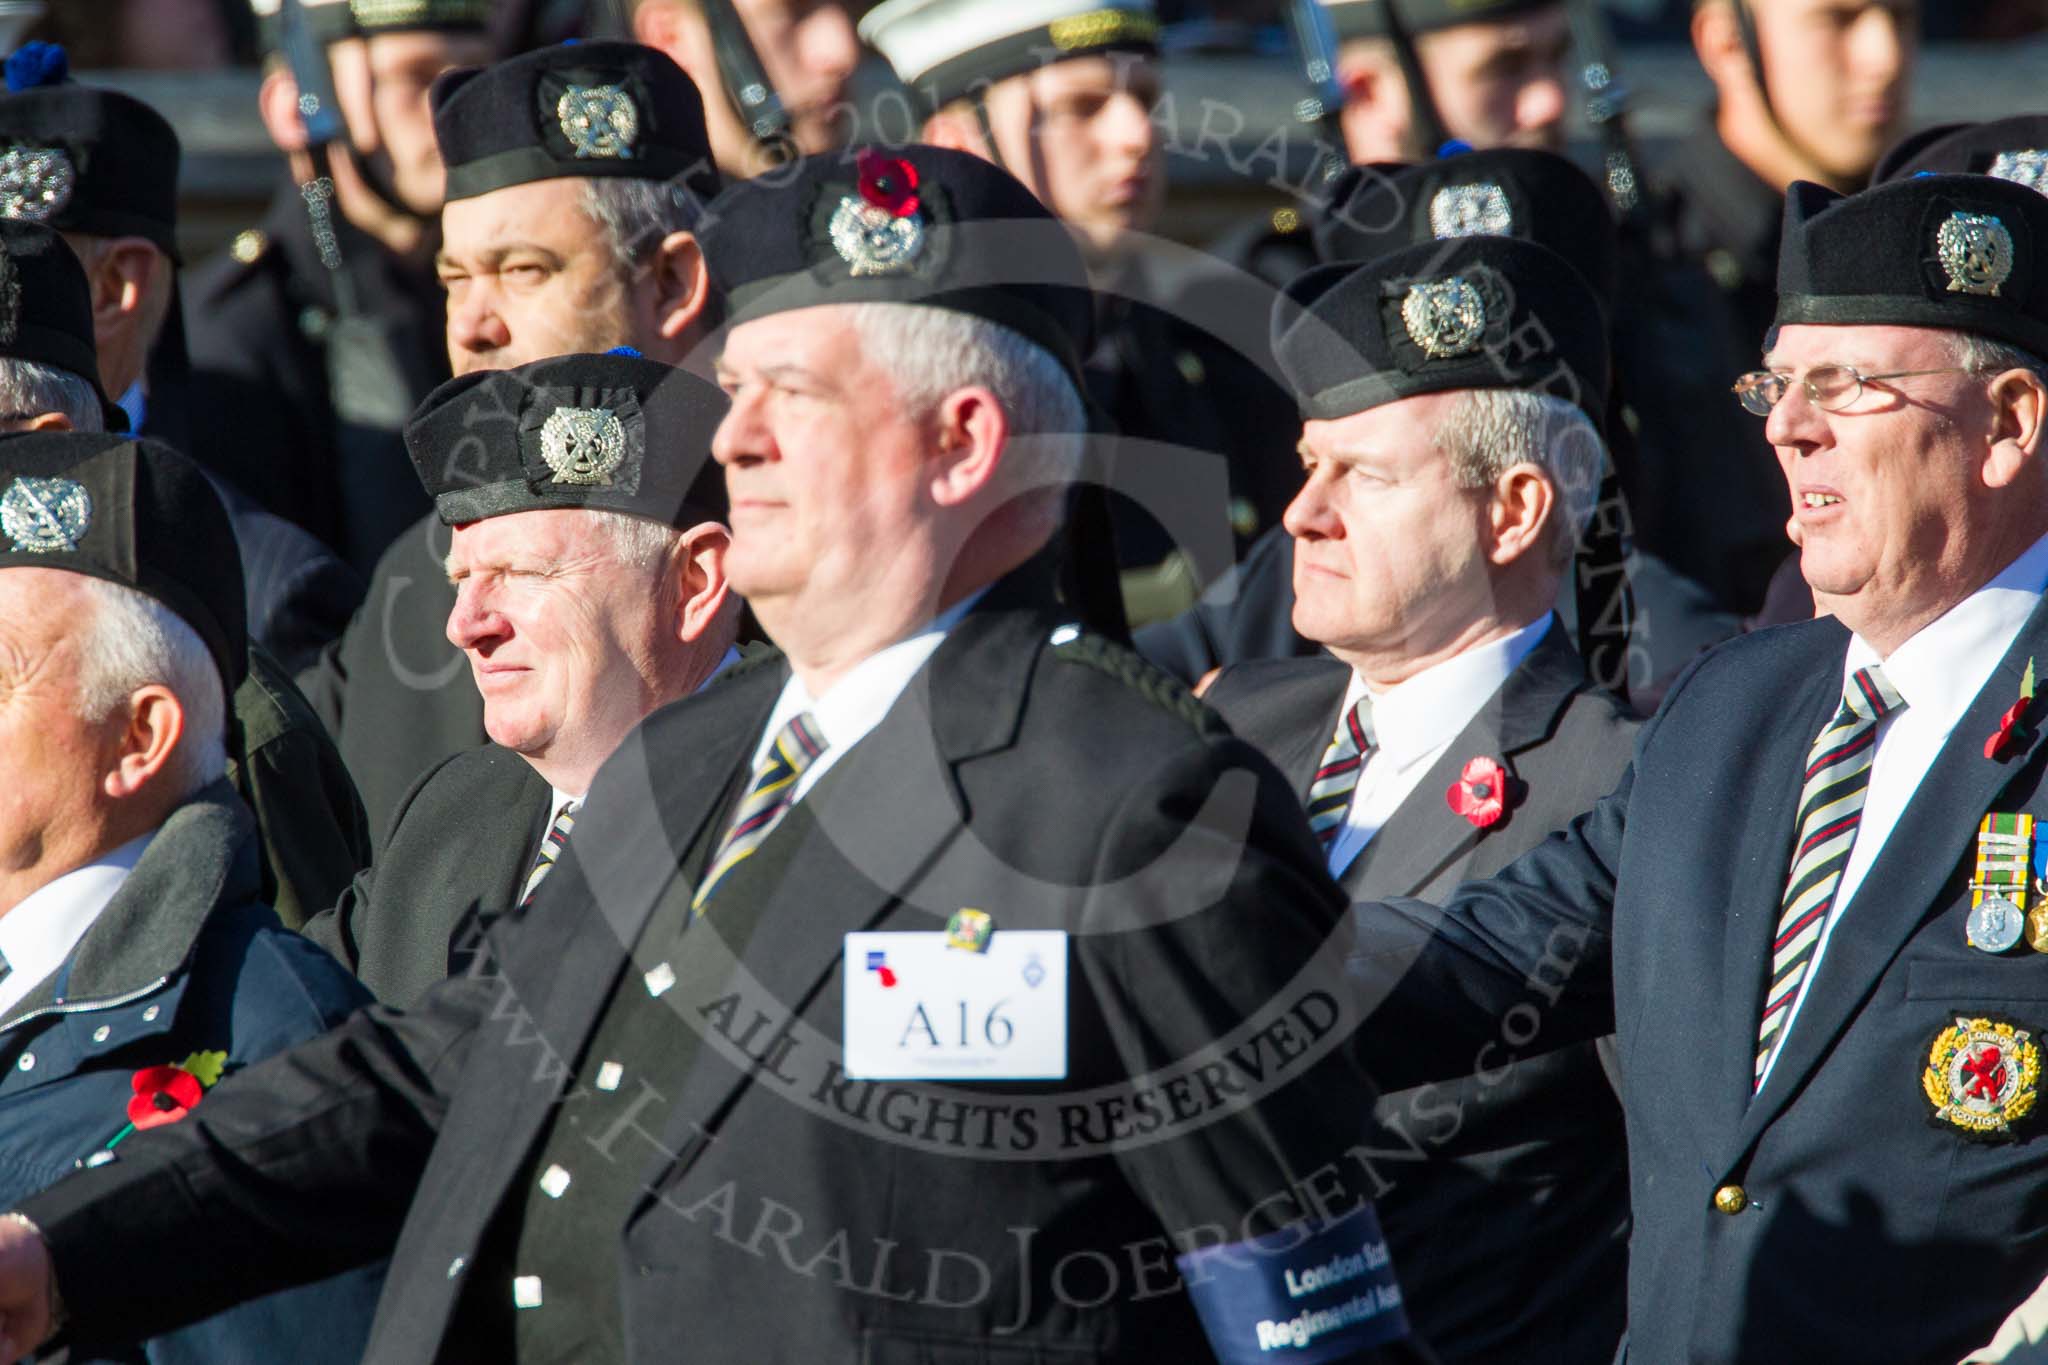 Remembrance Sunday at the Cenotaph in London 2014: Group A16 - London Scottish Regimental Association.
Press stand opposite the Foreign Office building, Whitehall, London SW1,
London,
Greater London,
United Kingdom,
on 09 November 2014 at 12:03, image #1299